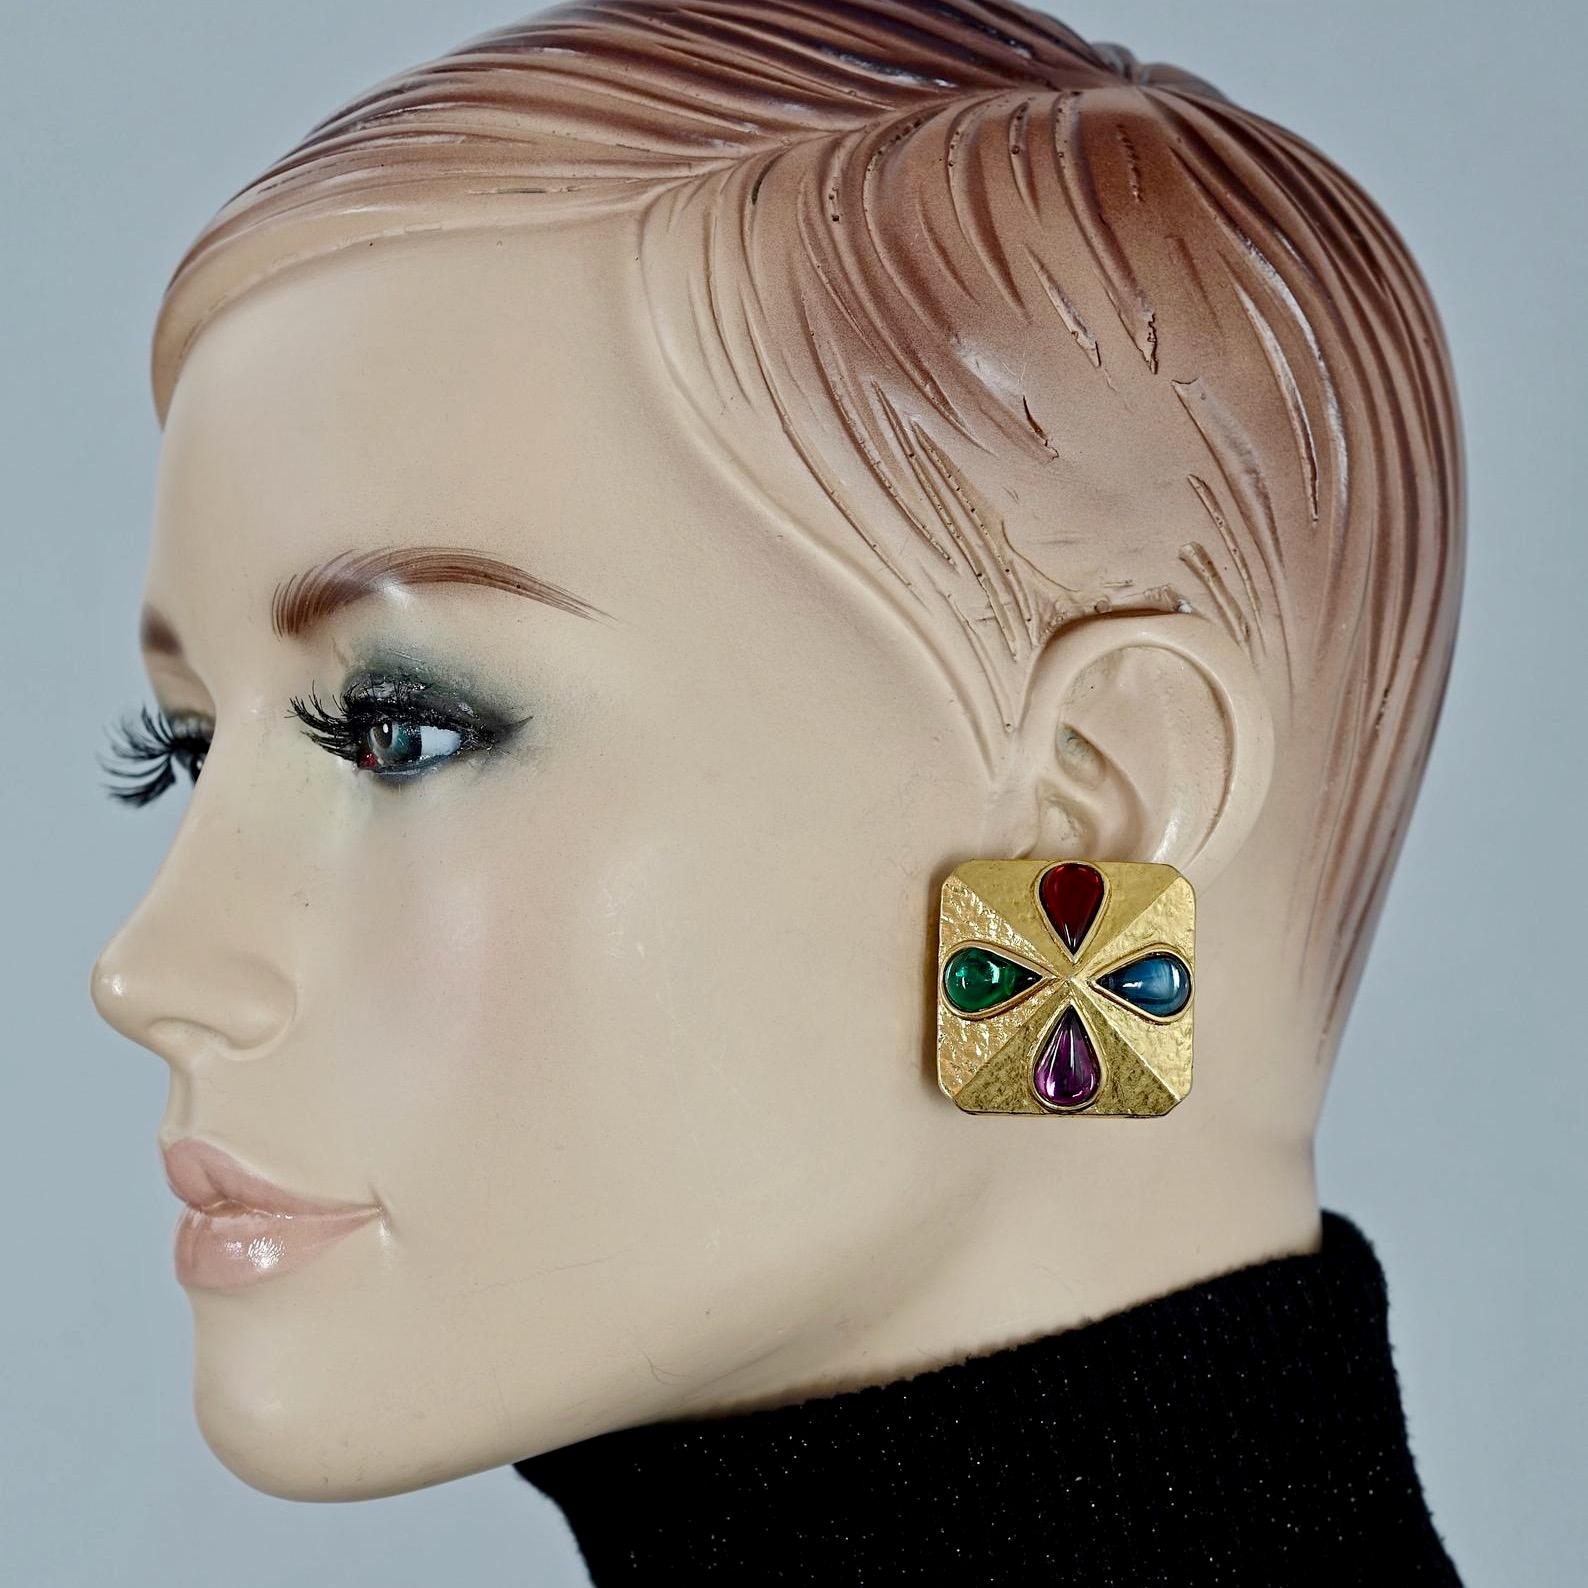 Vintage YVES SAINT LAURENT Ysl Multi Coloured Cabochon Flower Earrings

Measurements:
Height: 1.30 inches (3.3 cm)
Width: 1.30 inches (3.3 cm)
Weight per Earring: 25 grams

Features:
- 100% Authentic YVES SAINT LAURENT.
- Square earrings with multi